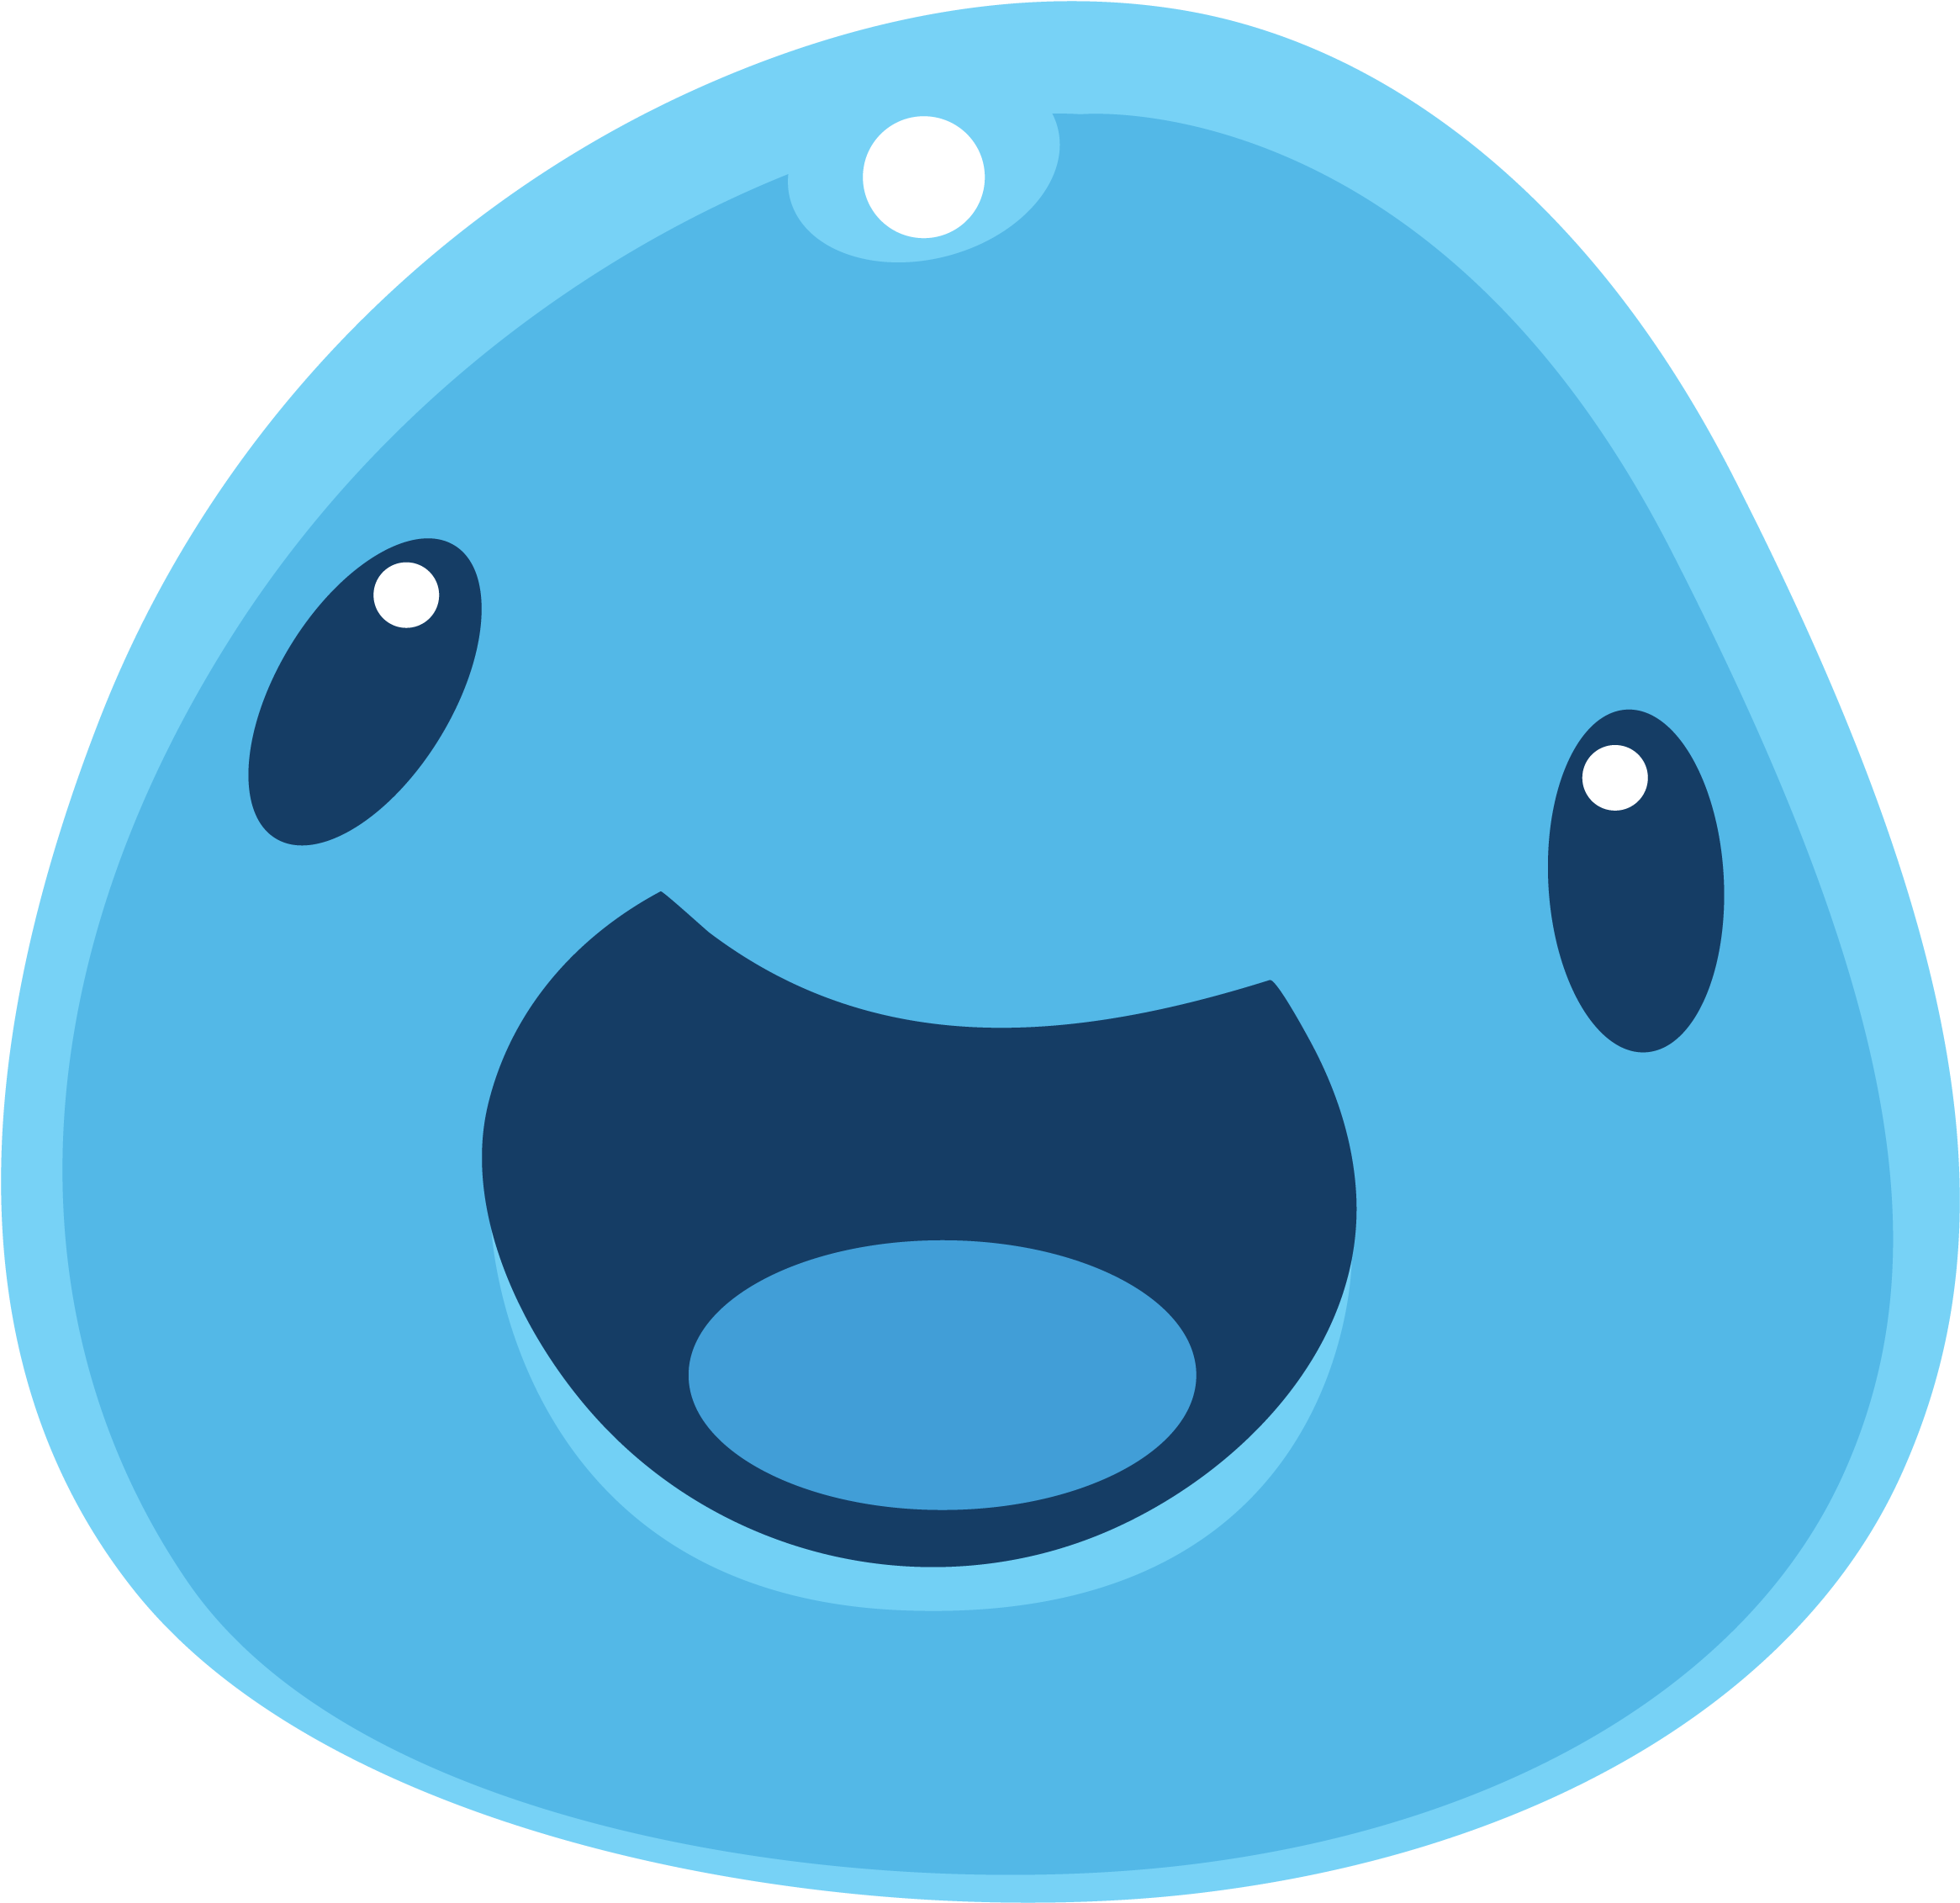 Aquarium Slime Rancher Fanon Wikia Fandom Powered By - Puddle Slime In Slime Rancher (3000x3000)